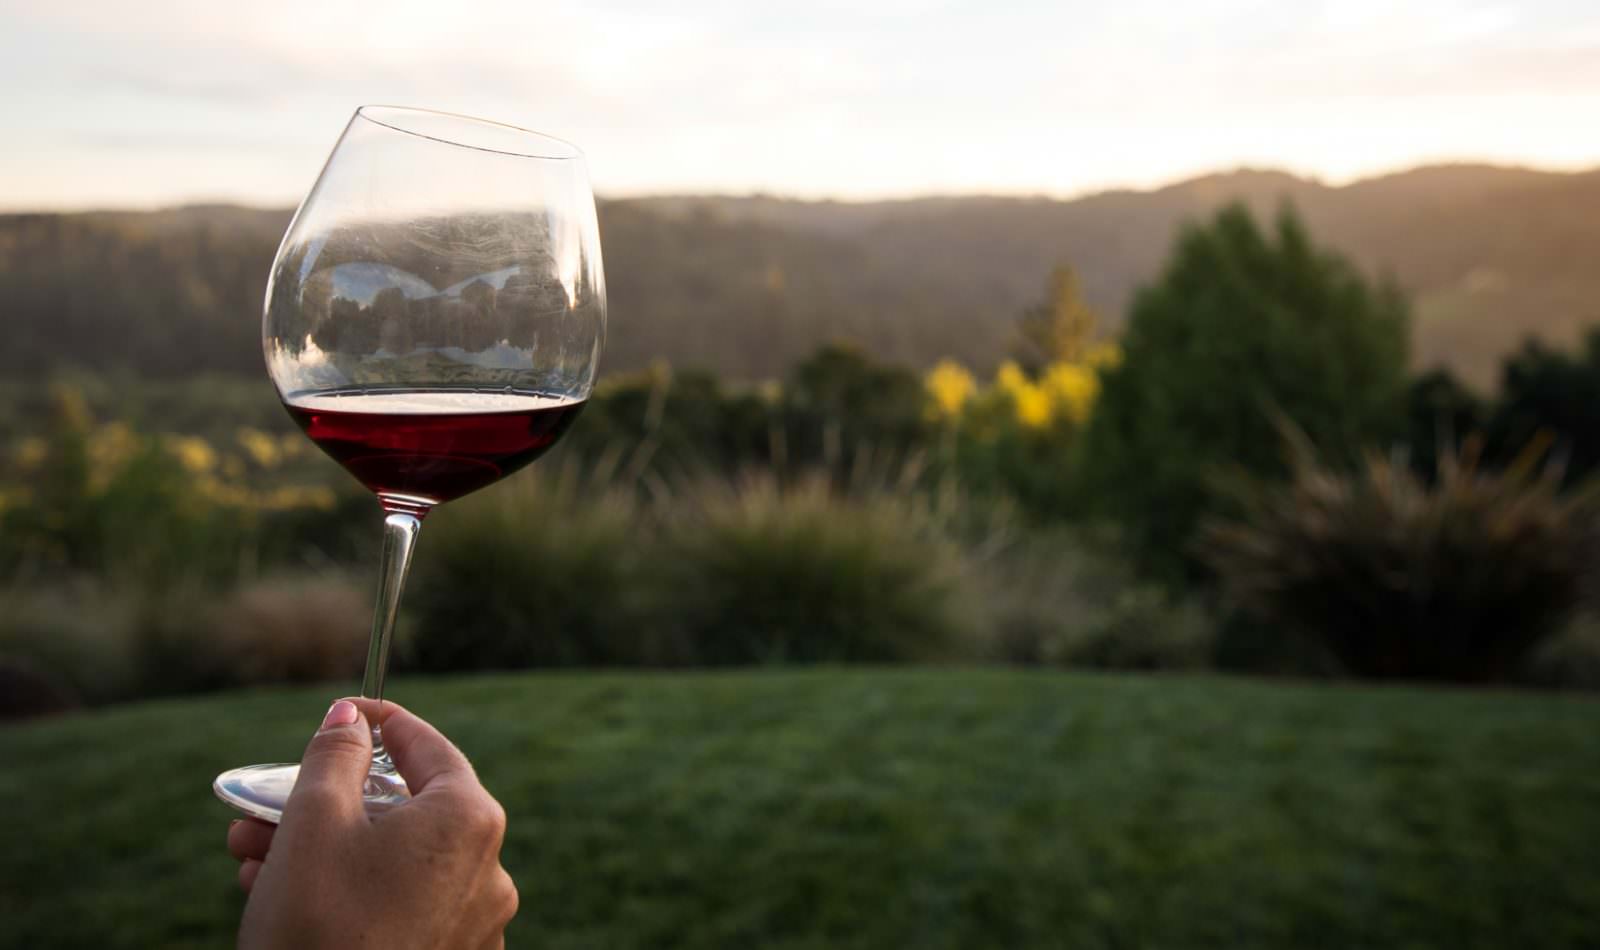 hand holding a glass of red wine with greenery in background